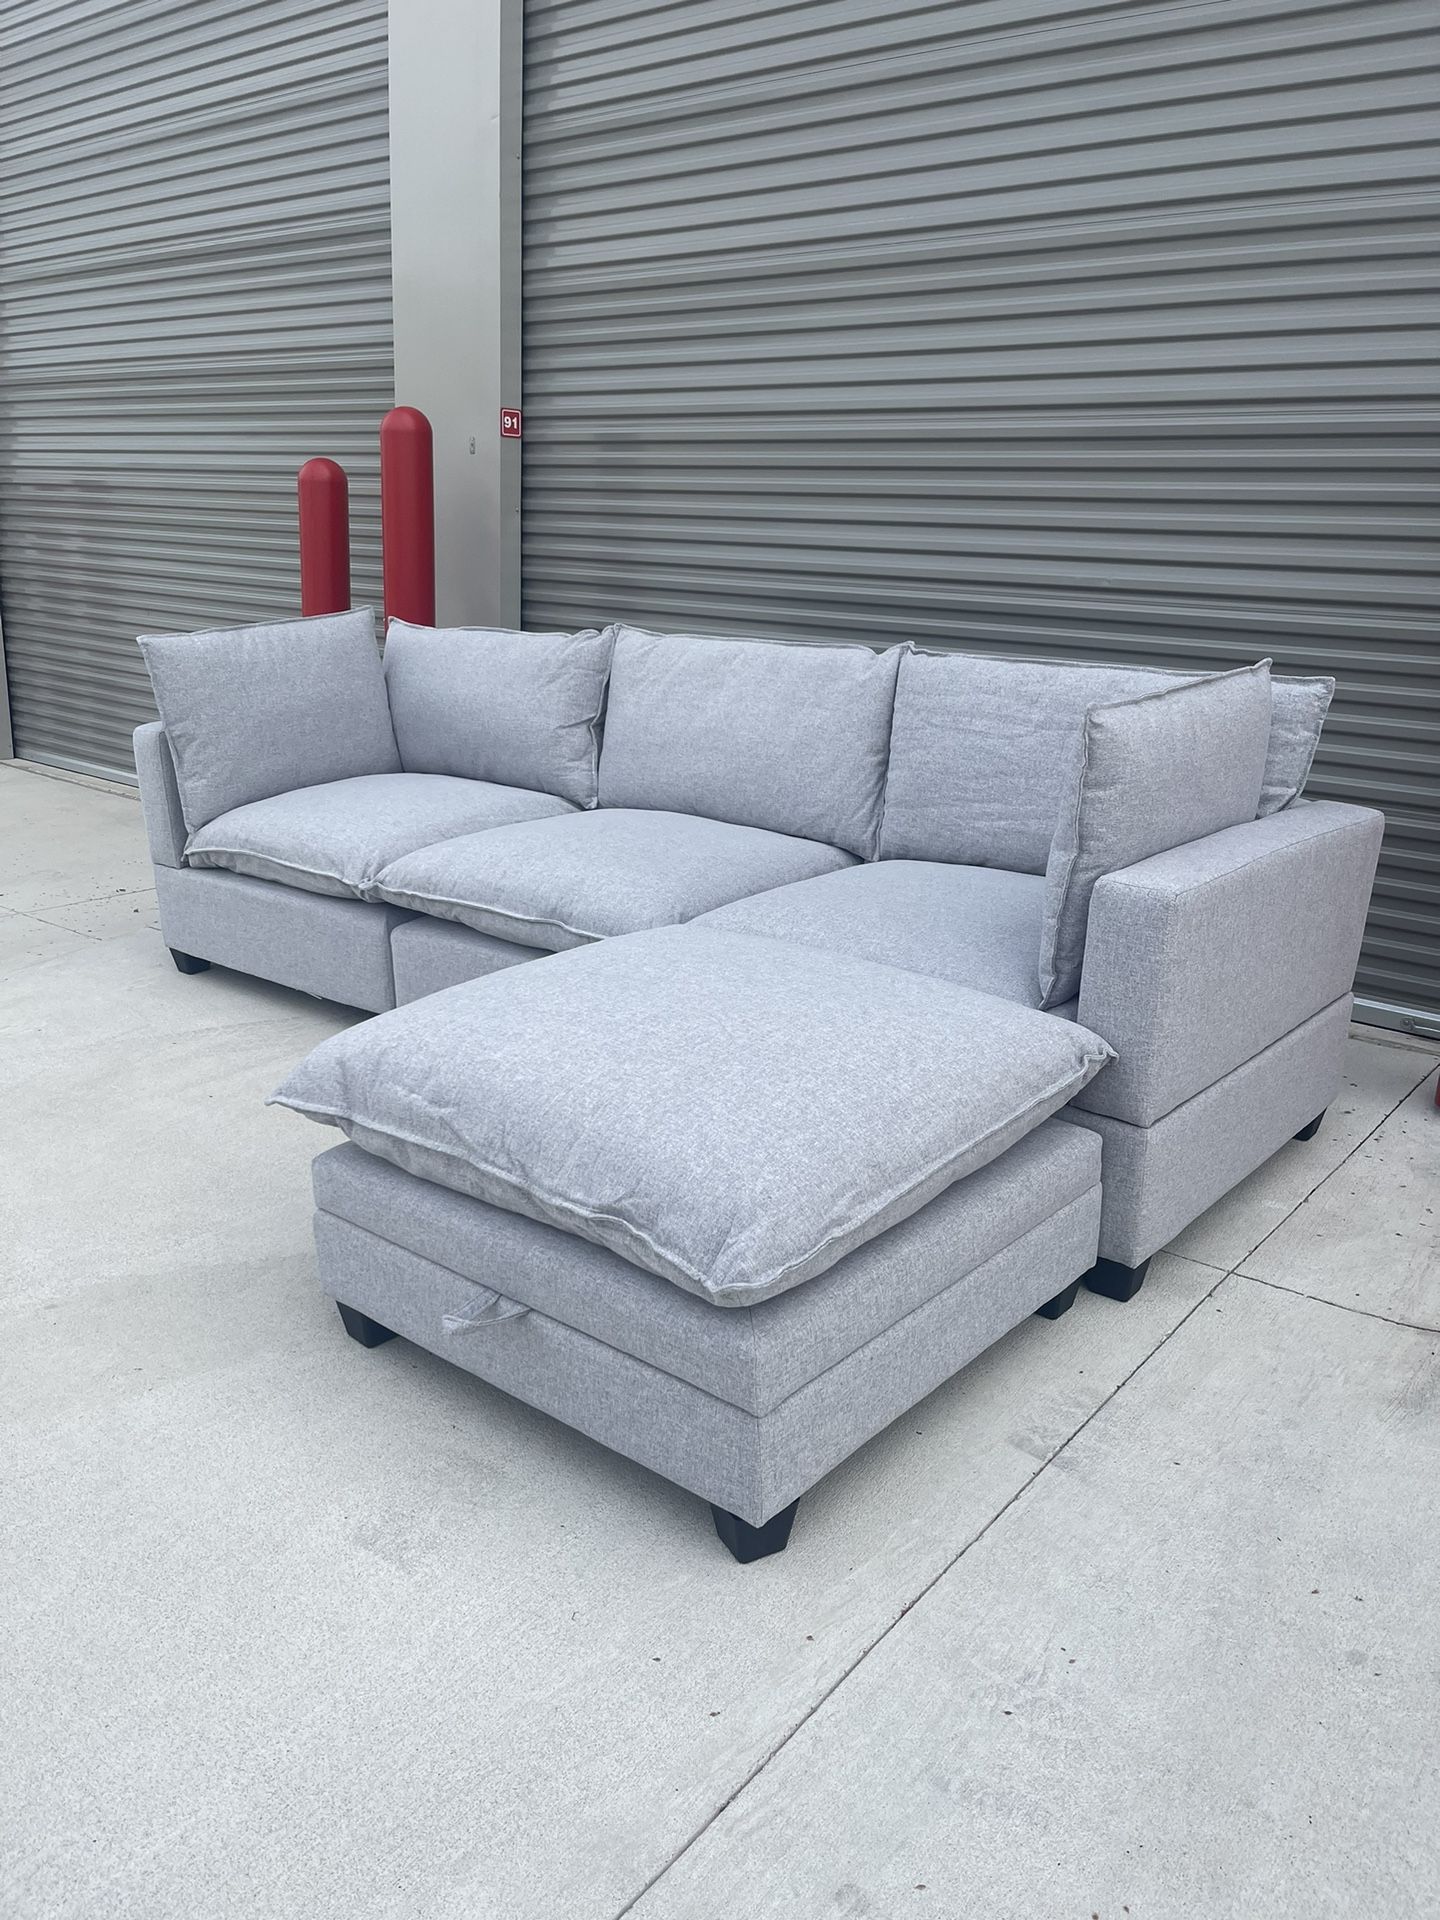 Brand New Cloud Sectional Couch With Storage Ottoman